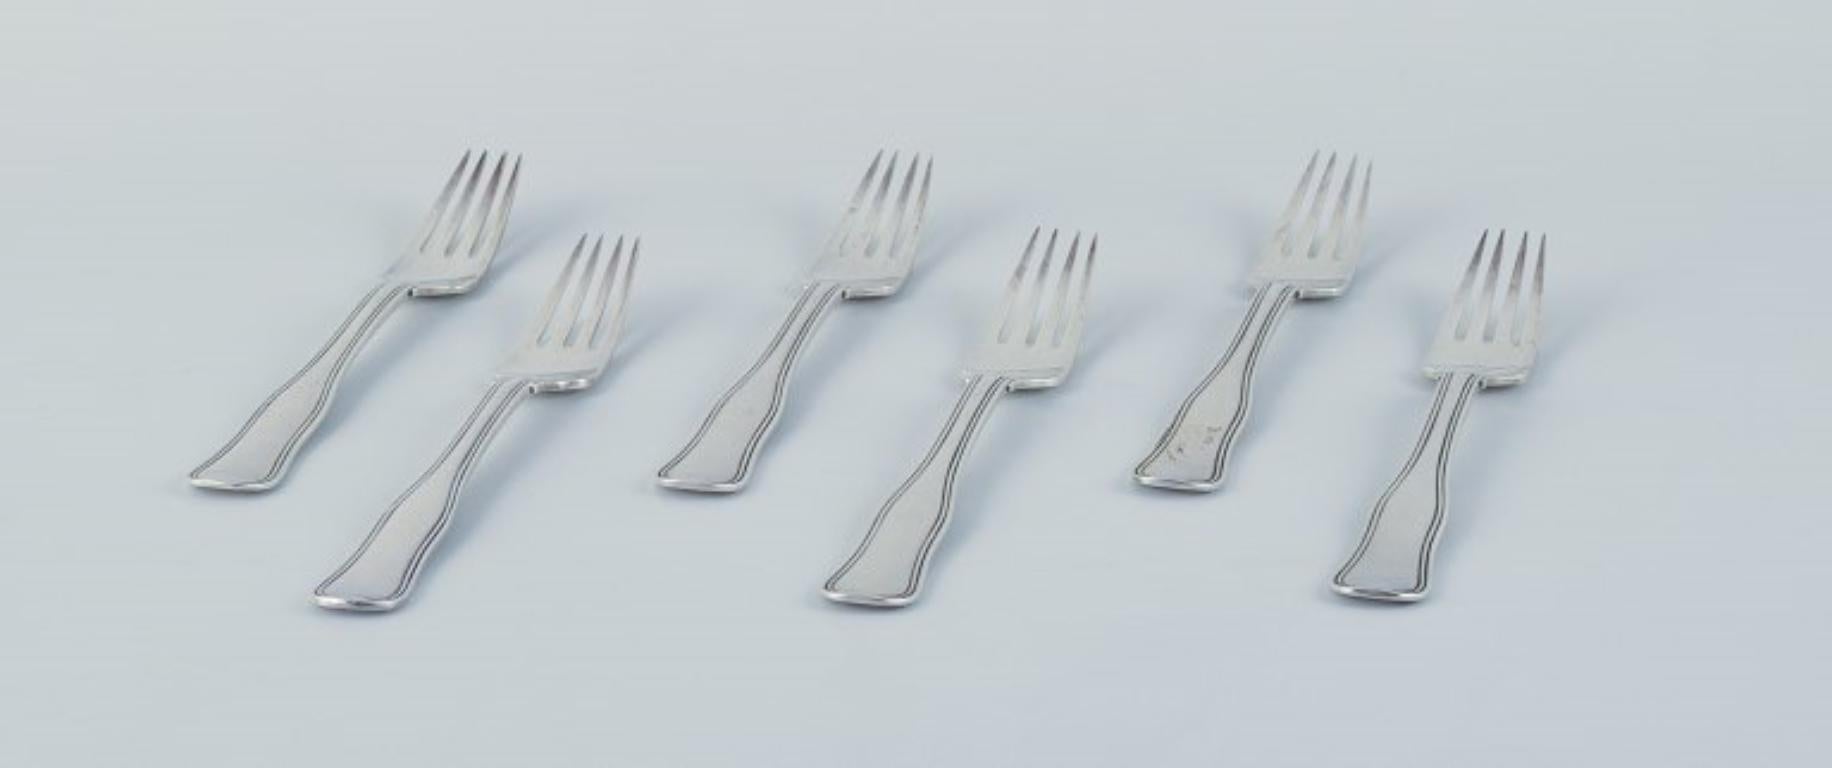 Georg Jensen Old Danish, a set of six lunch forks in sterling silver.
Stamped with post 1944 hallmark.
In excellent condition.
Dimensions: 16.8 cm.